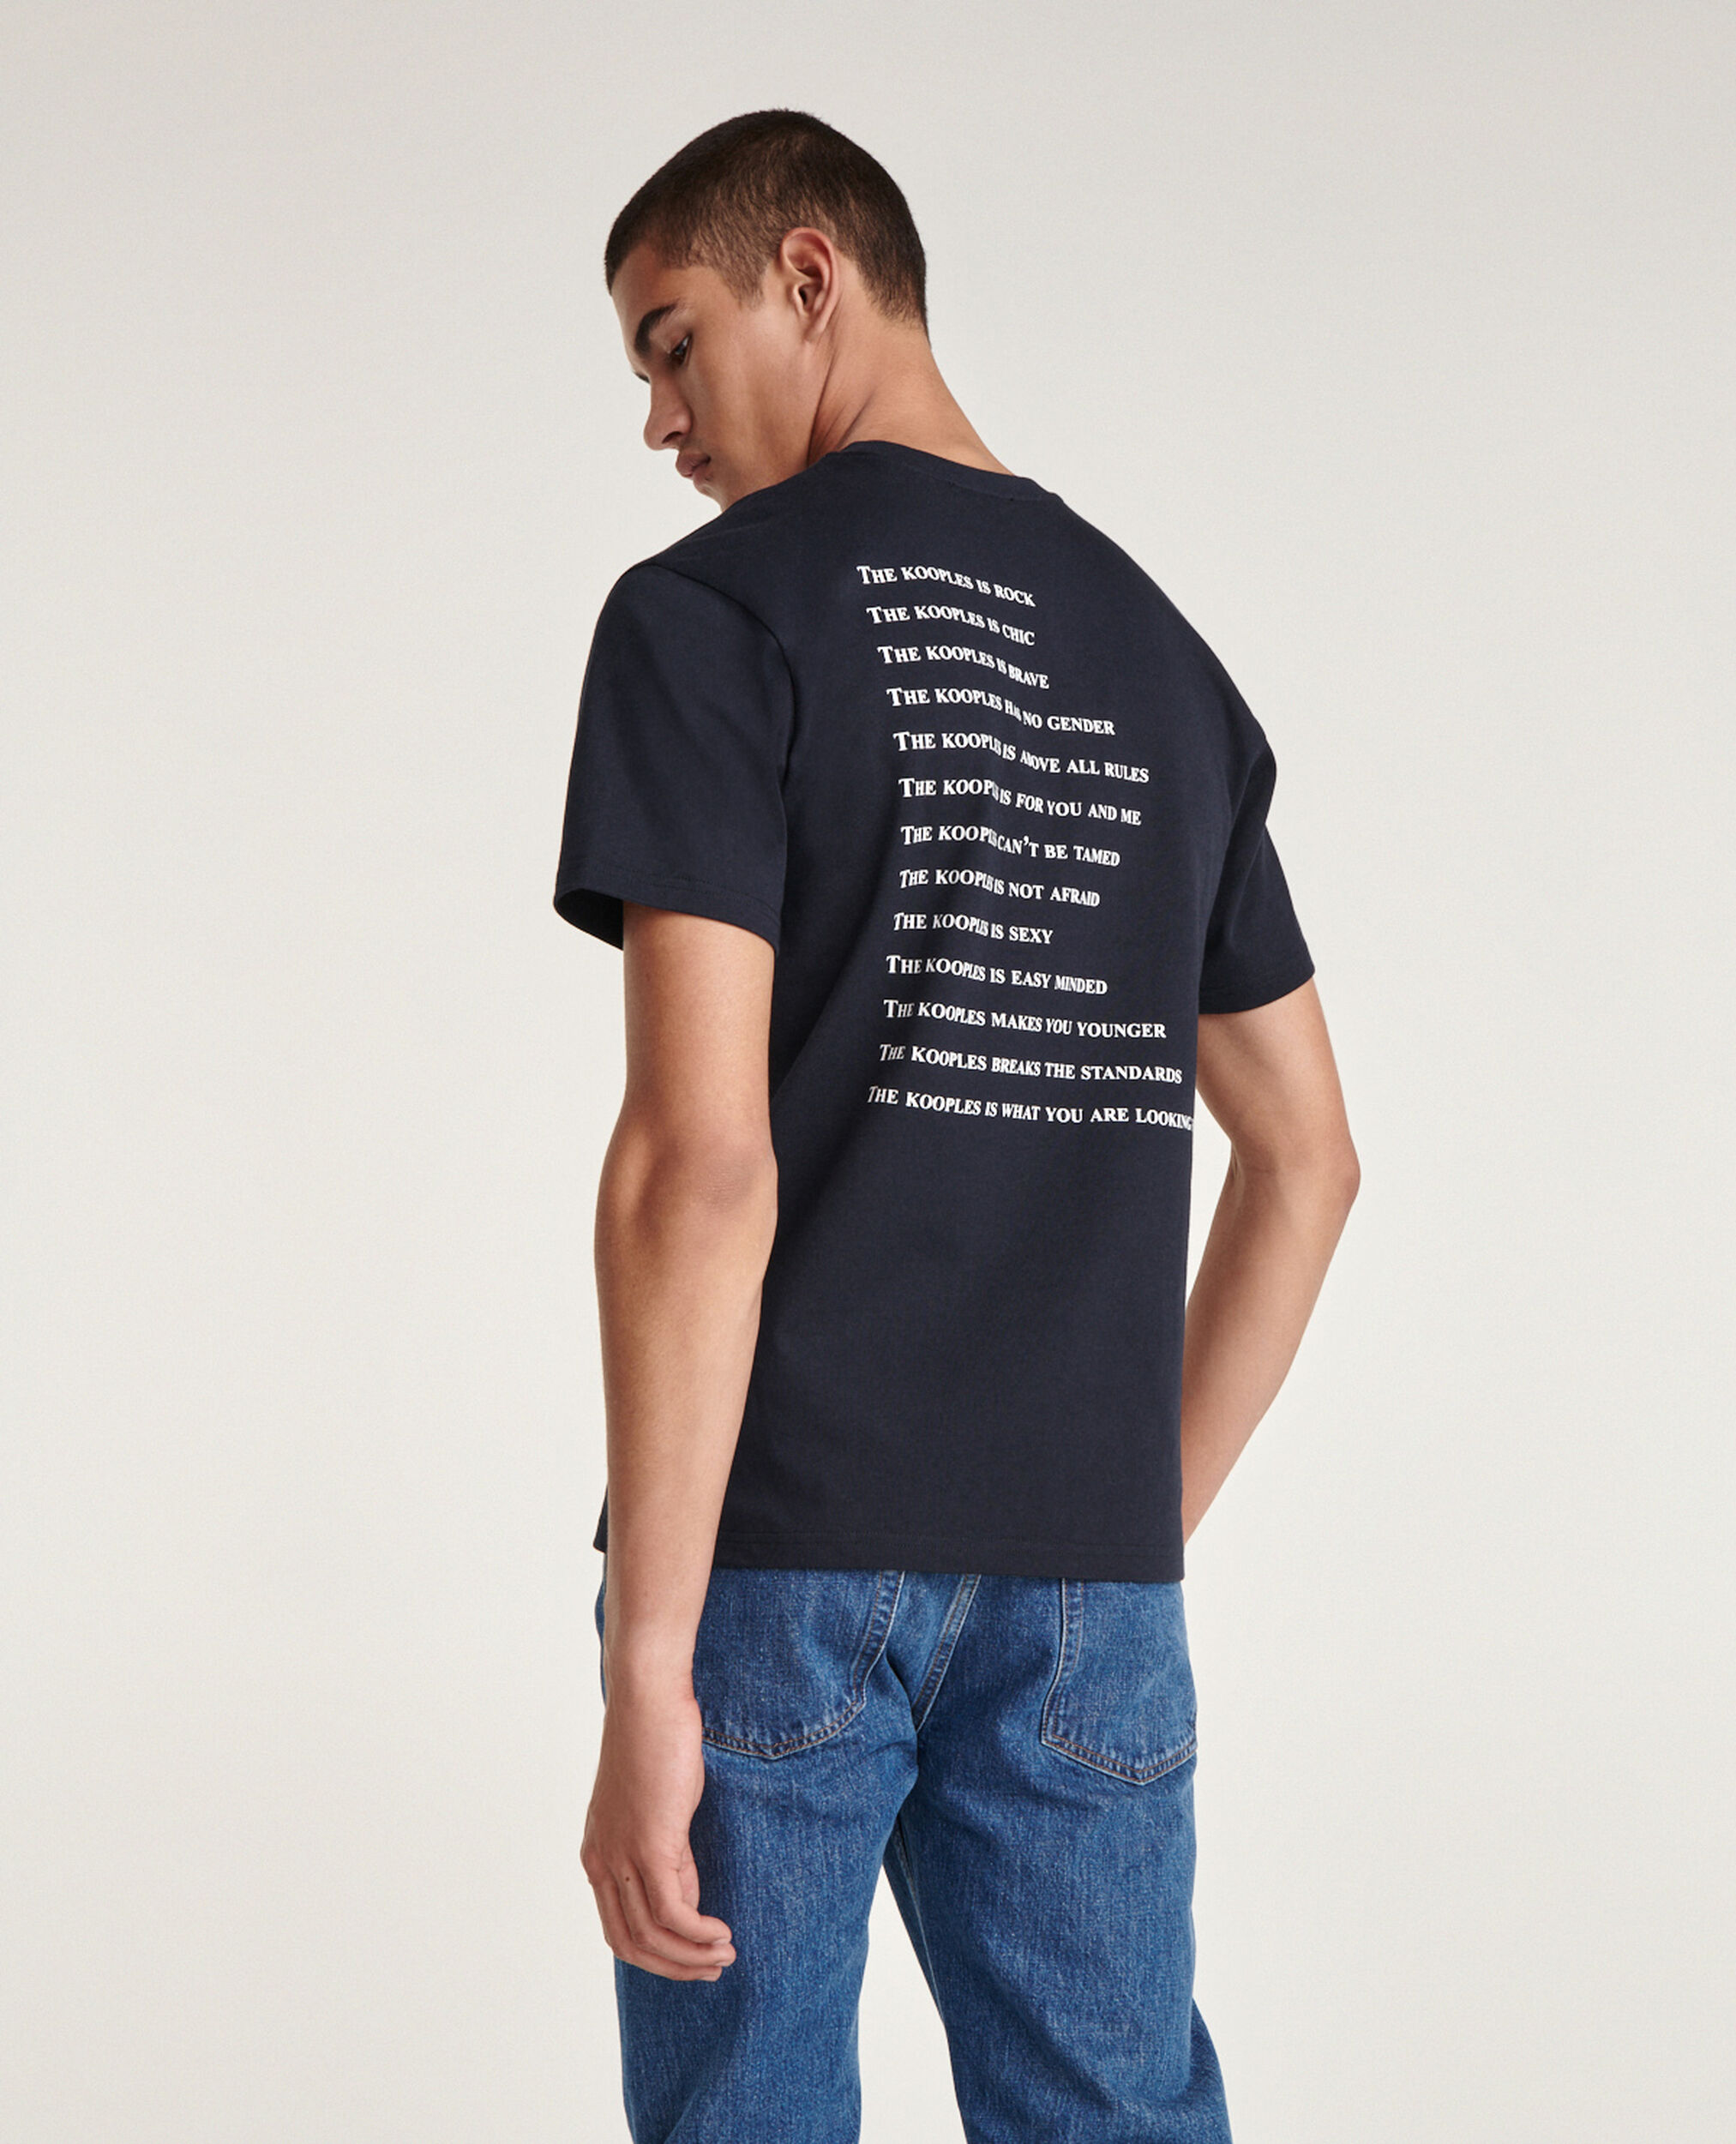 NAVY COTTON T-SHIRT WITH PRINT WHAT IS, NAVY, hi-res image number null